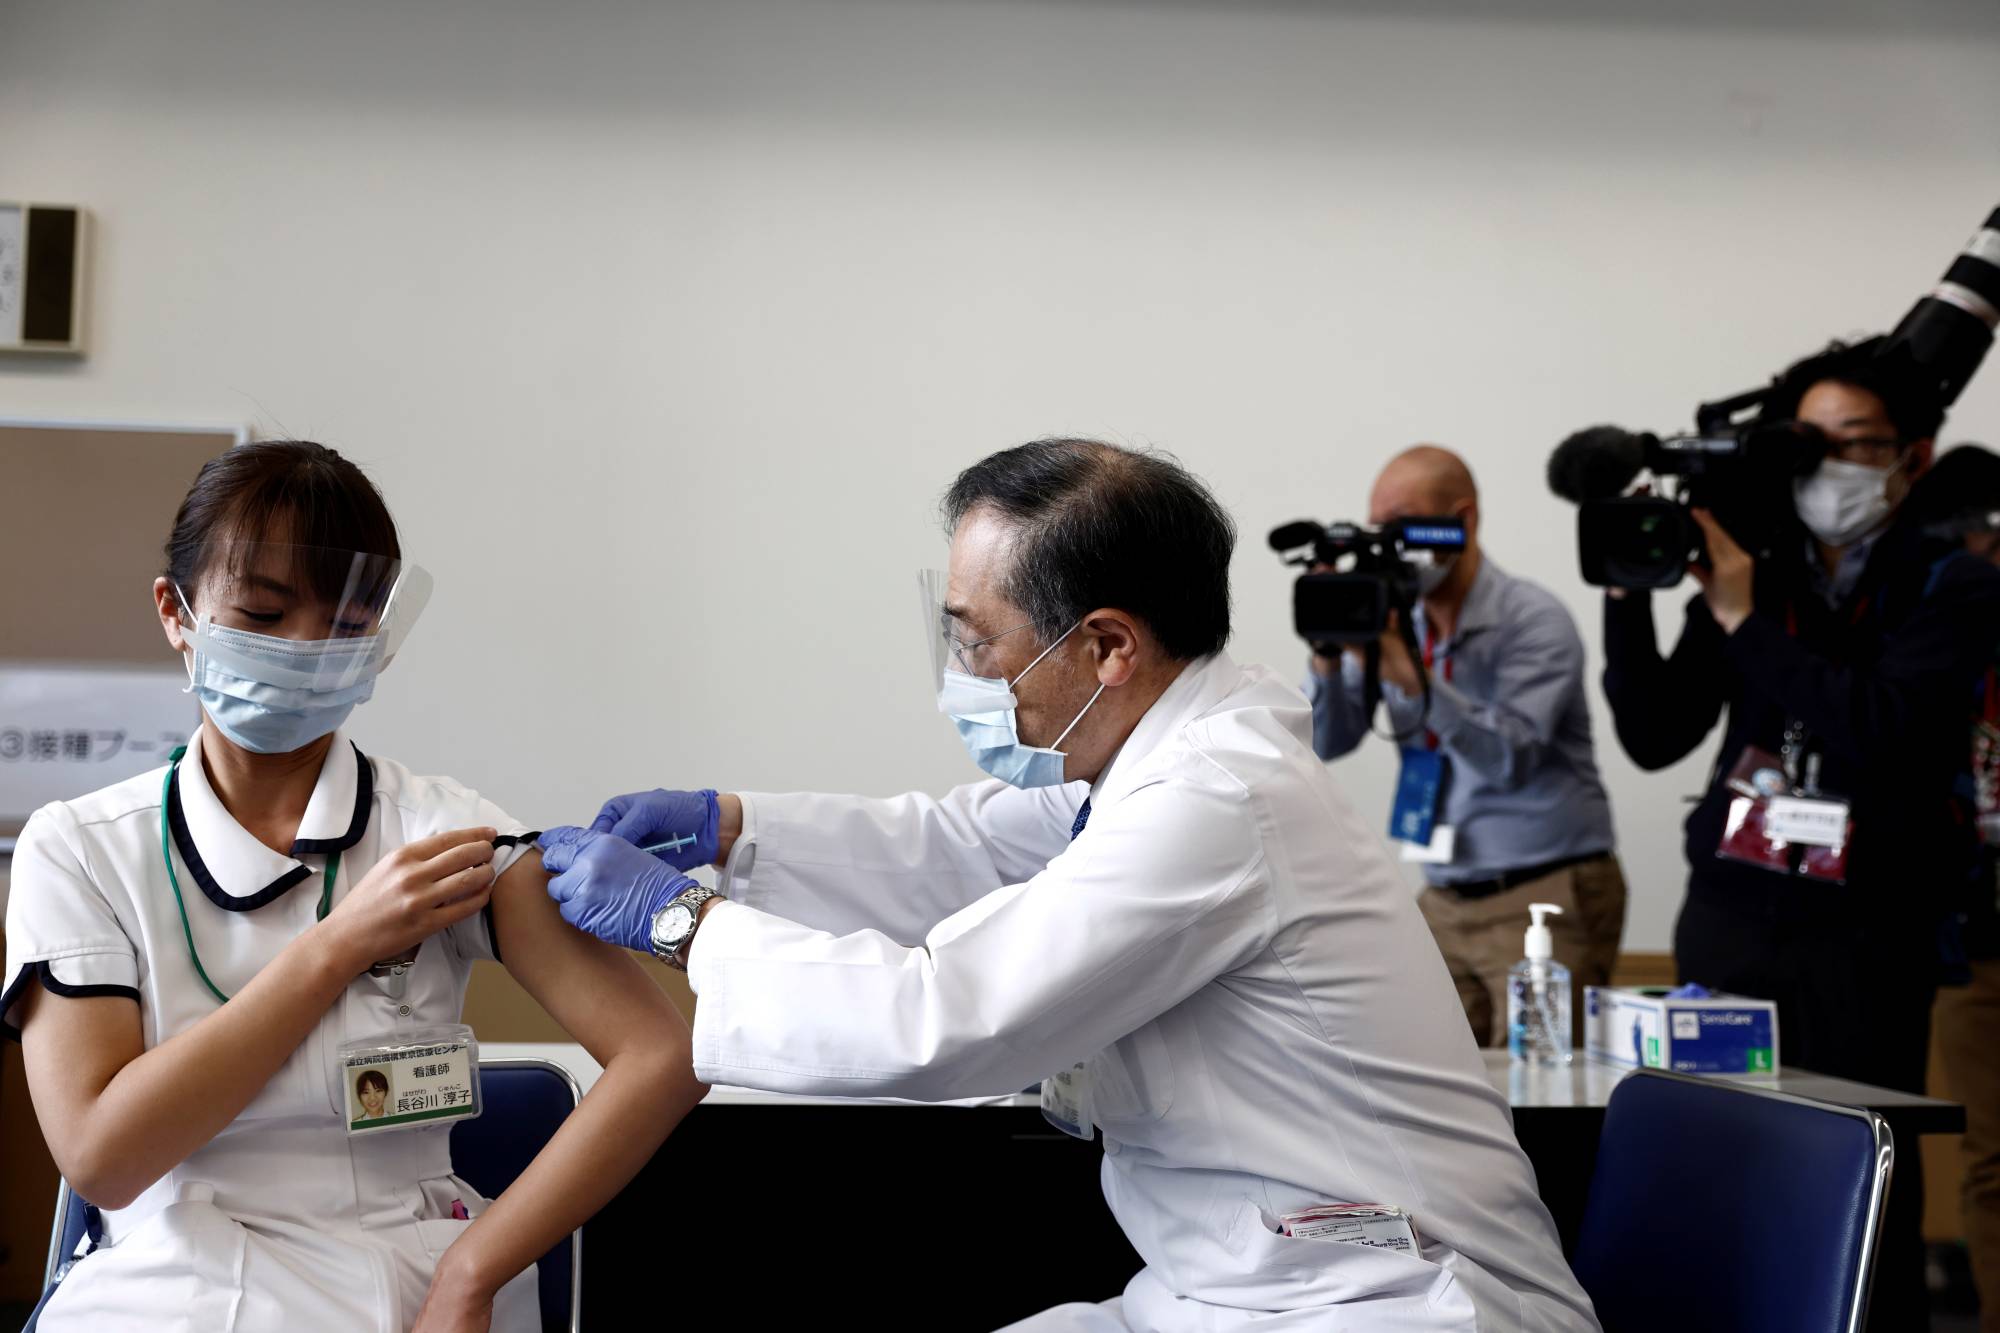 A medical worker receives a dose of the COVID-19 vaccine as Japan launches its inoculation campaign, at Tokyo Medical Center on Wednesday. | POOL / VIA REUTERS